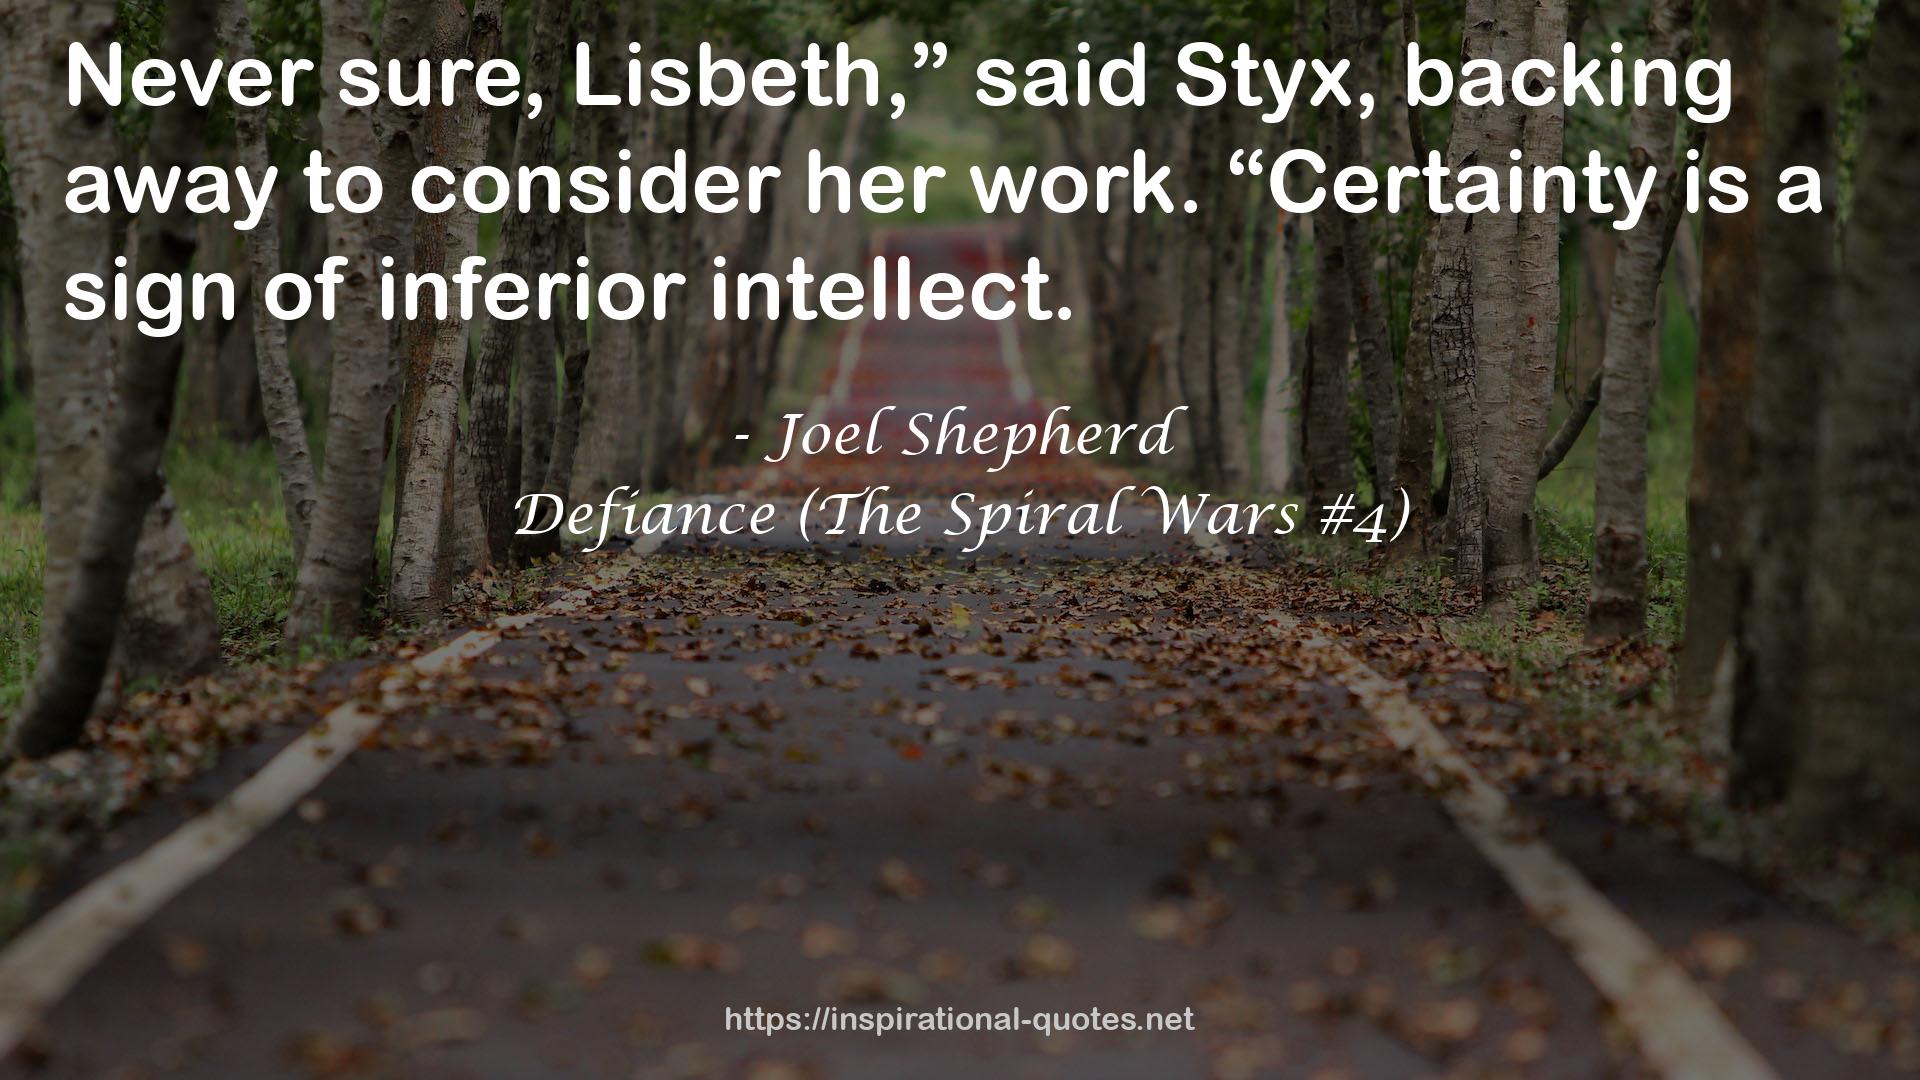 Defiance (The Spiral Wars #4) QUOTES